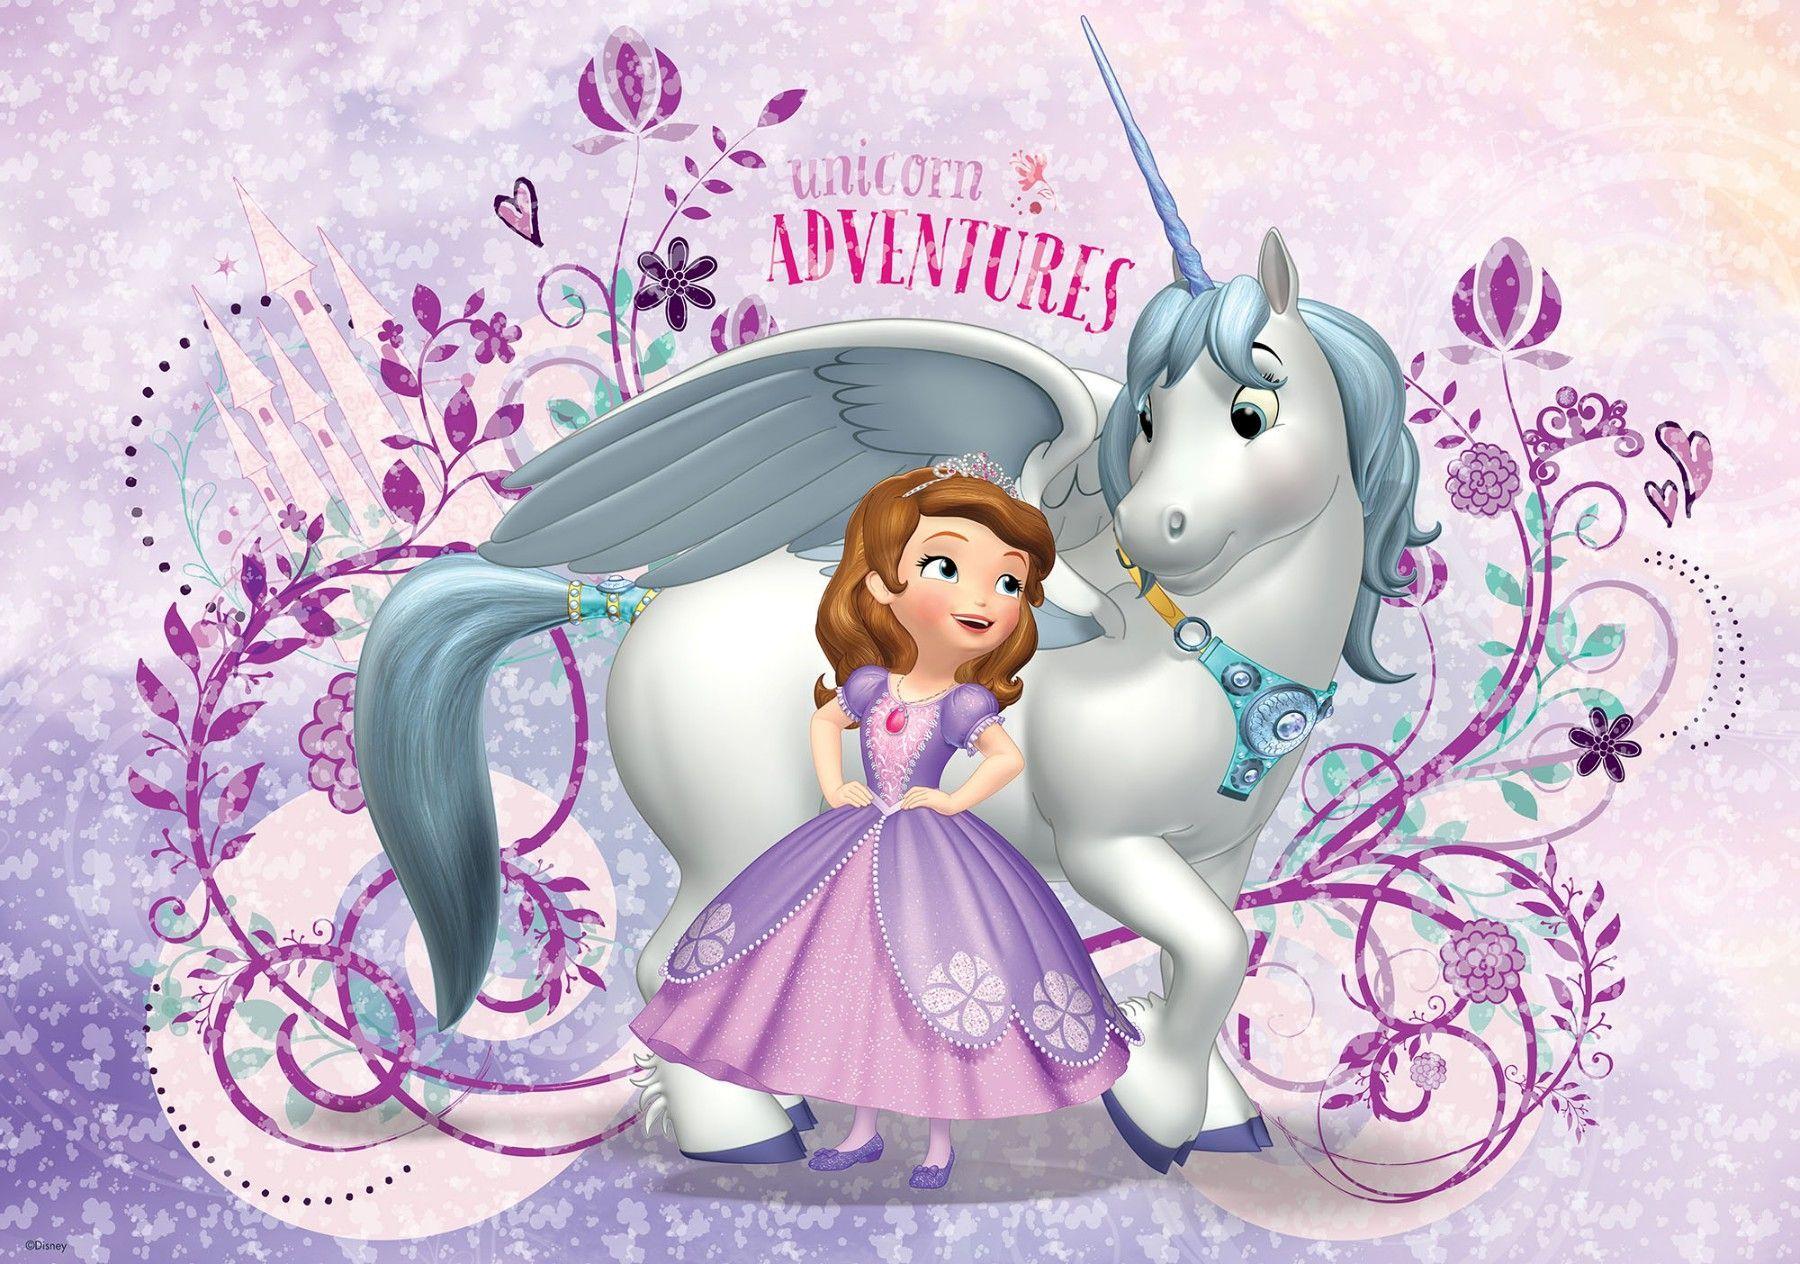 Download Inspired Princess | Sofia The First Wallpaper | Wallpapers.com